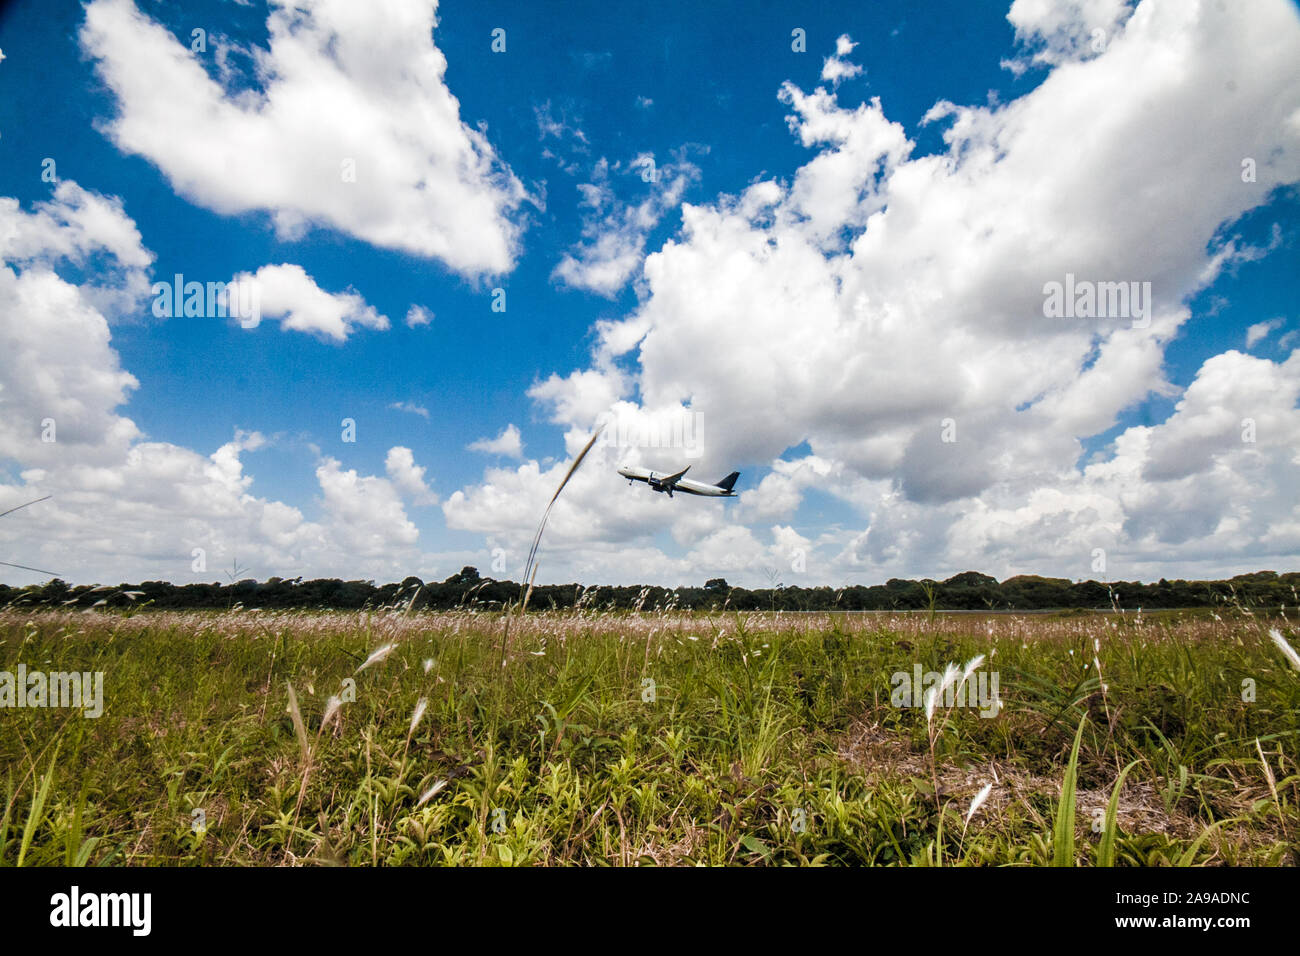 Commercial airplane taking off at Belem International Airport ready to travel on a sunny day through the grasses of the runway Stock Photo